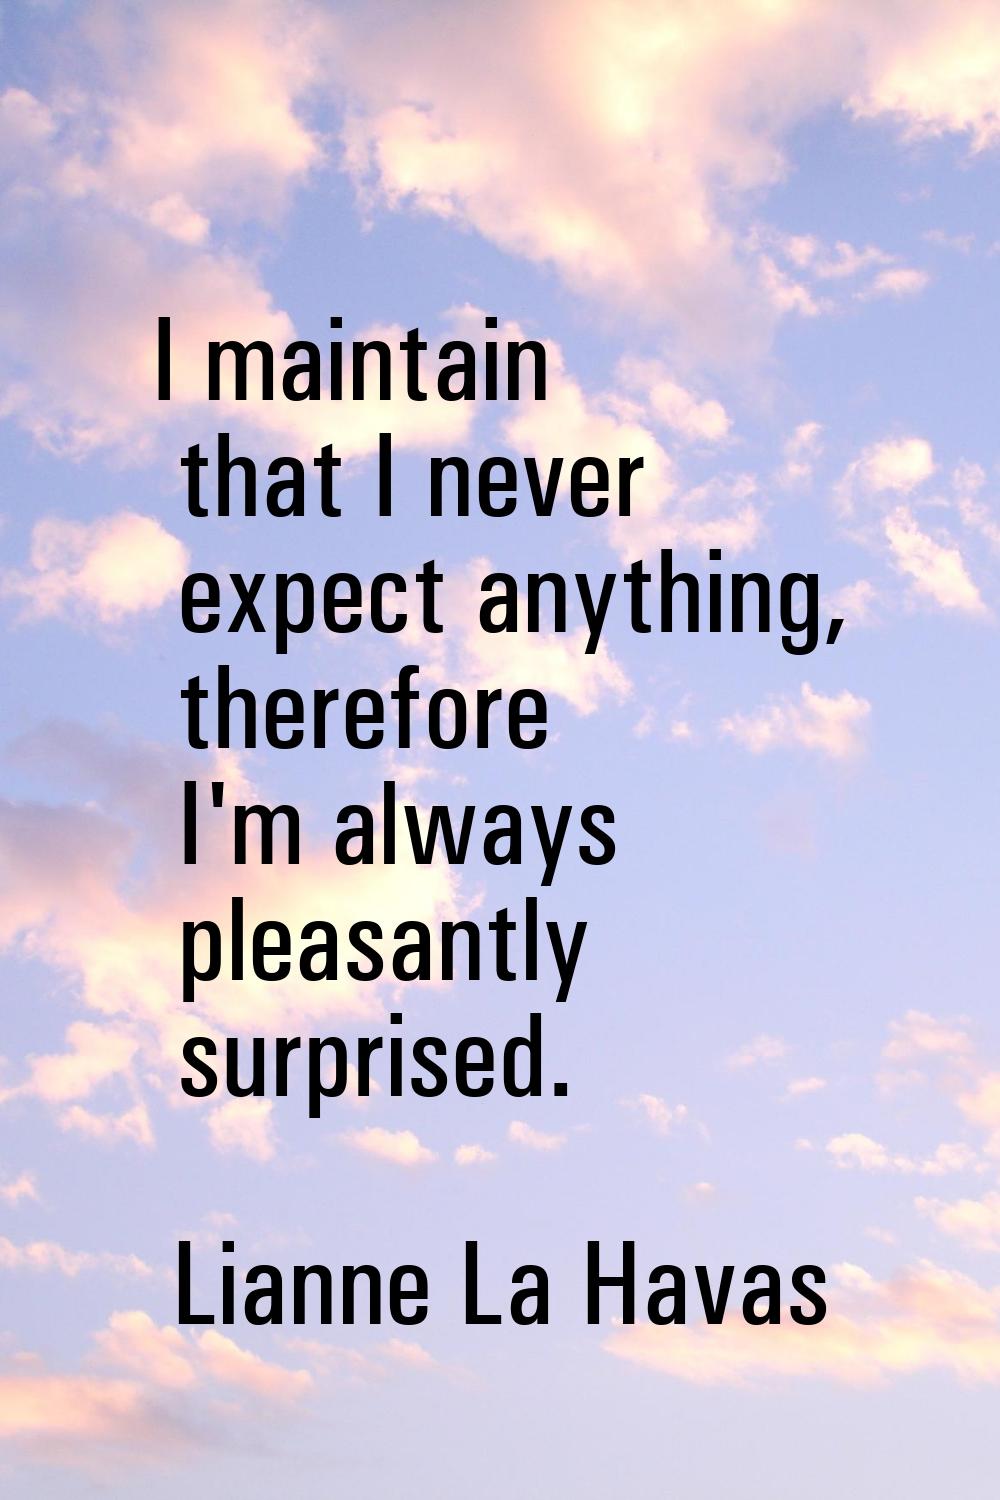 I maintain that I never expect anything, therefore I'm always pleasantly surprised.